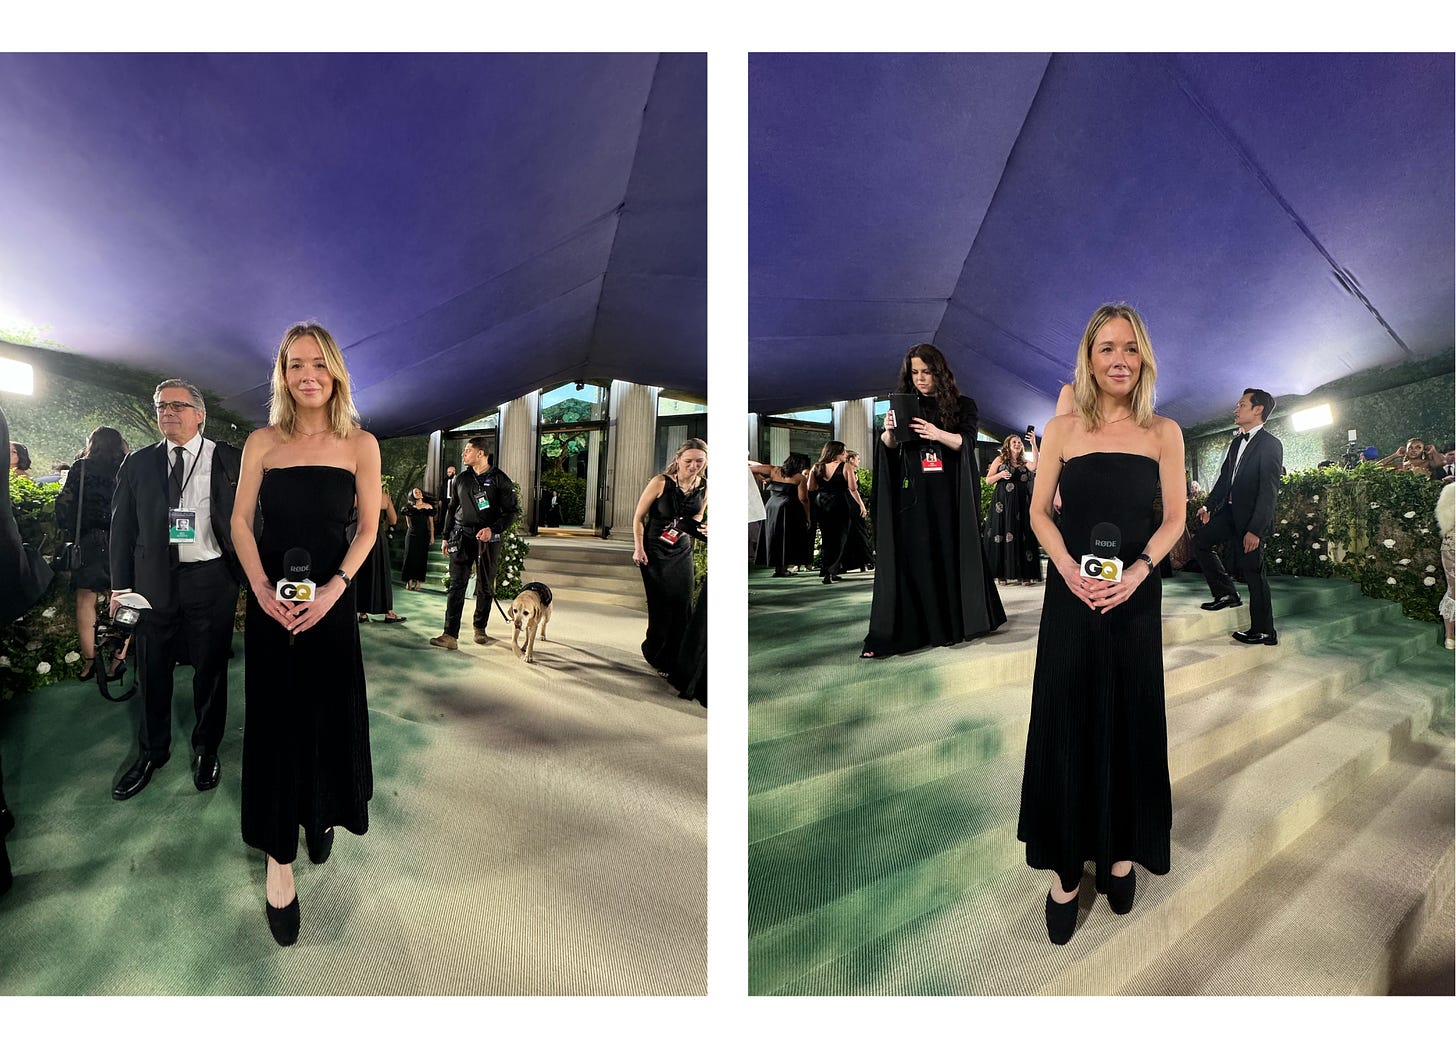 Two photos of Katie on the red carpet before things start, a dog is in one of them